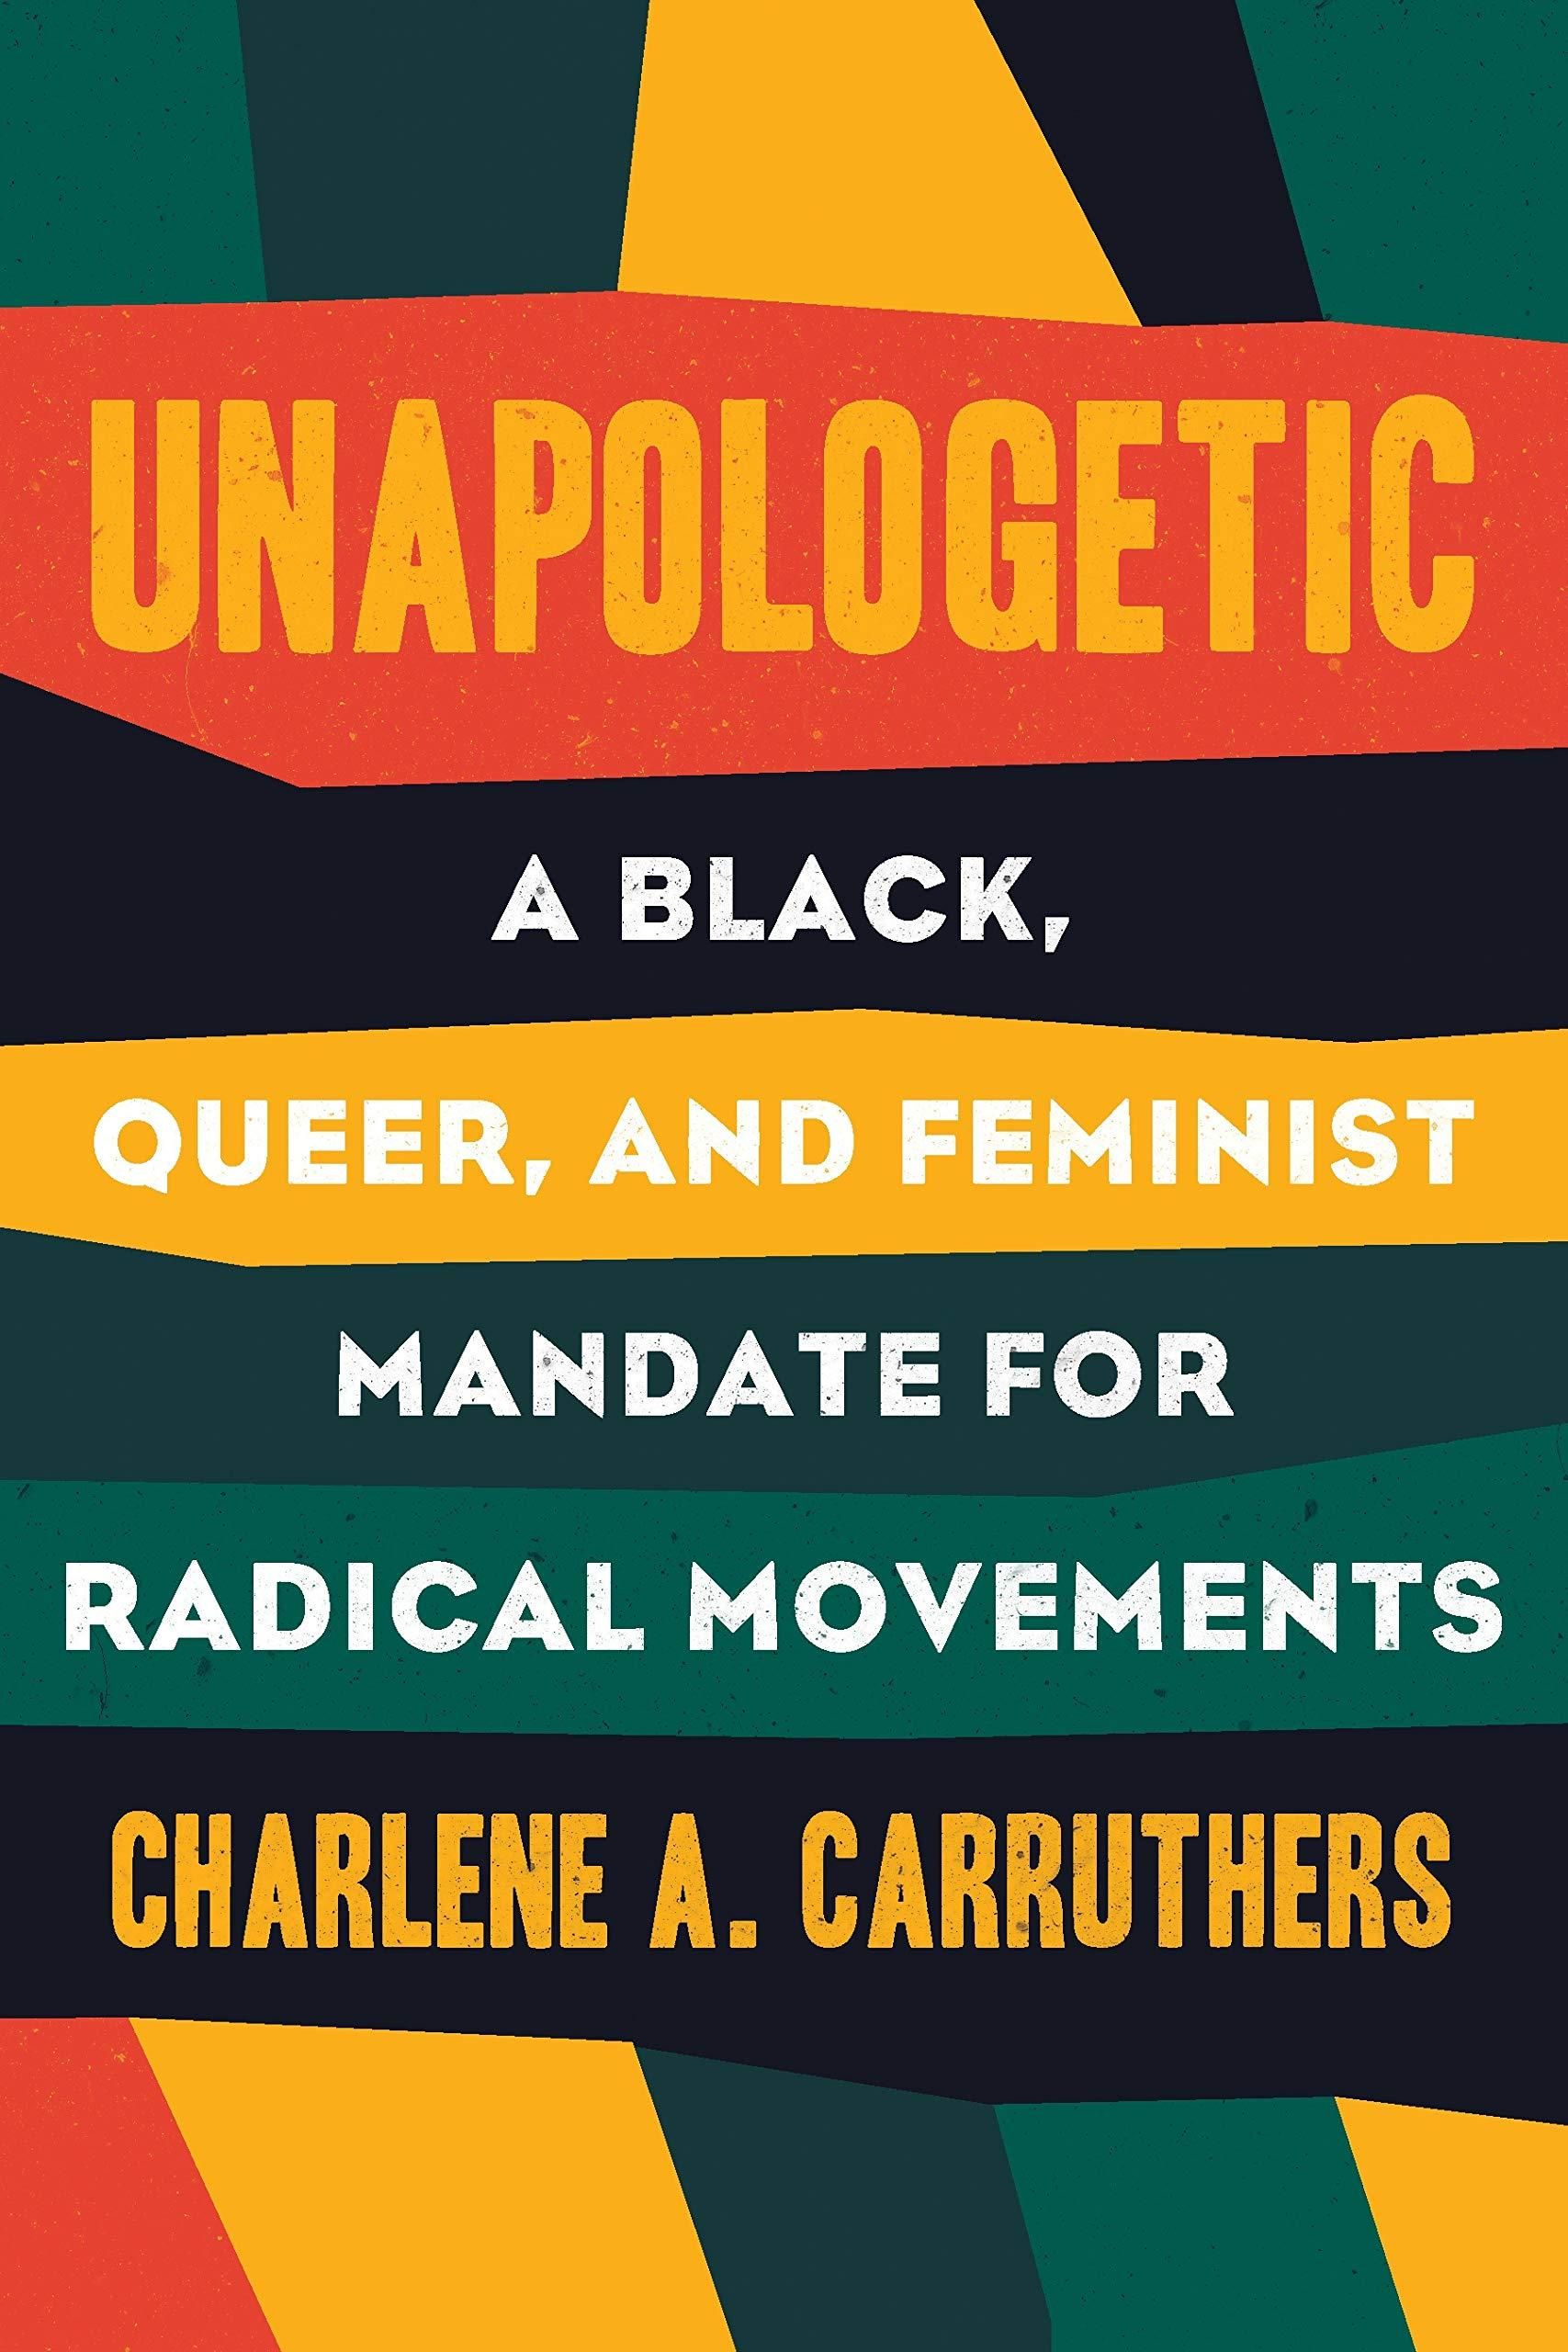 2. Unapologetic by Charlene Carruthers